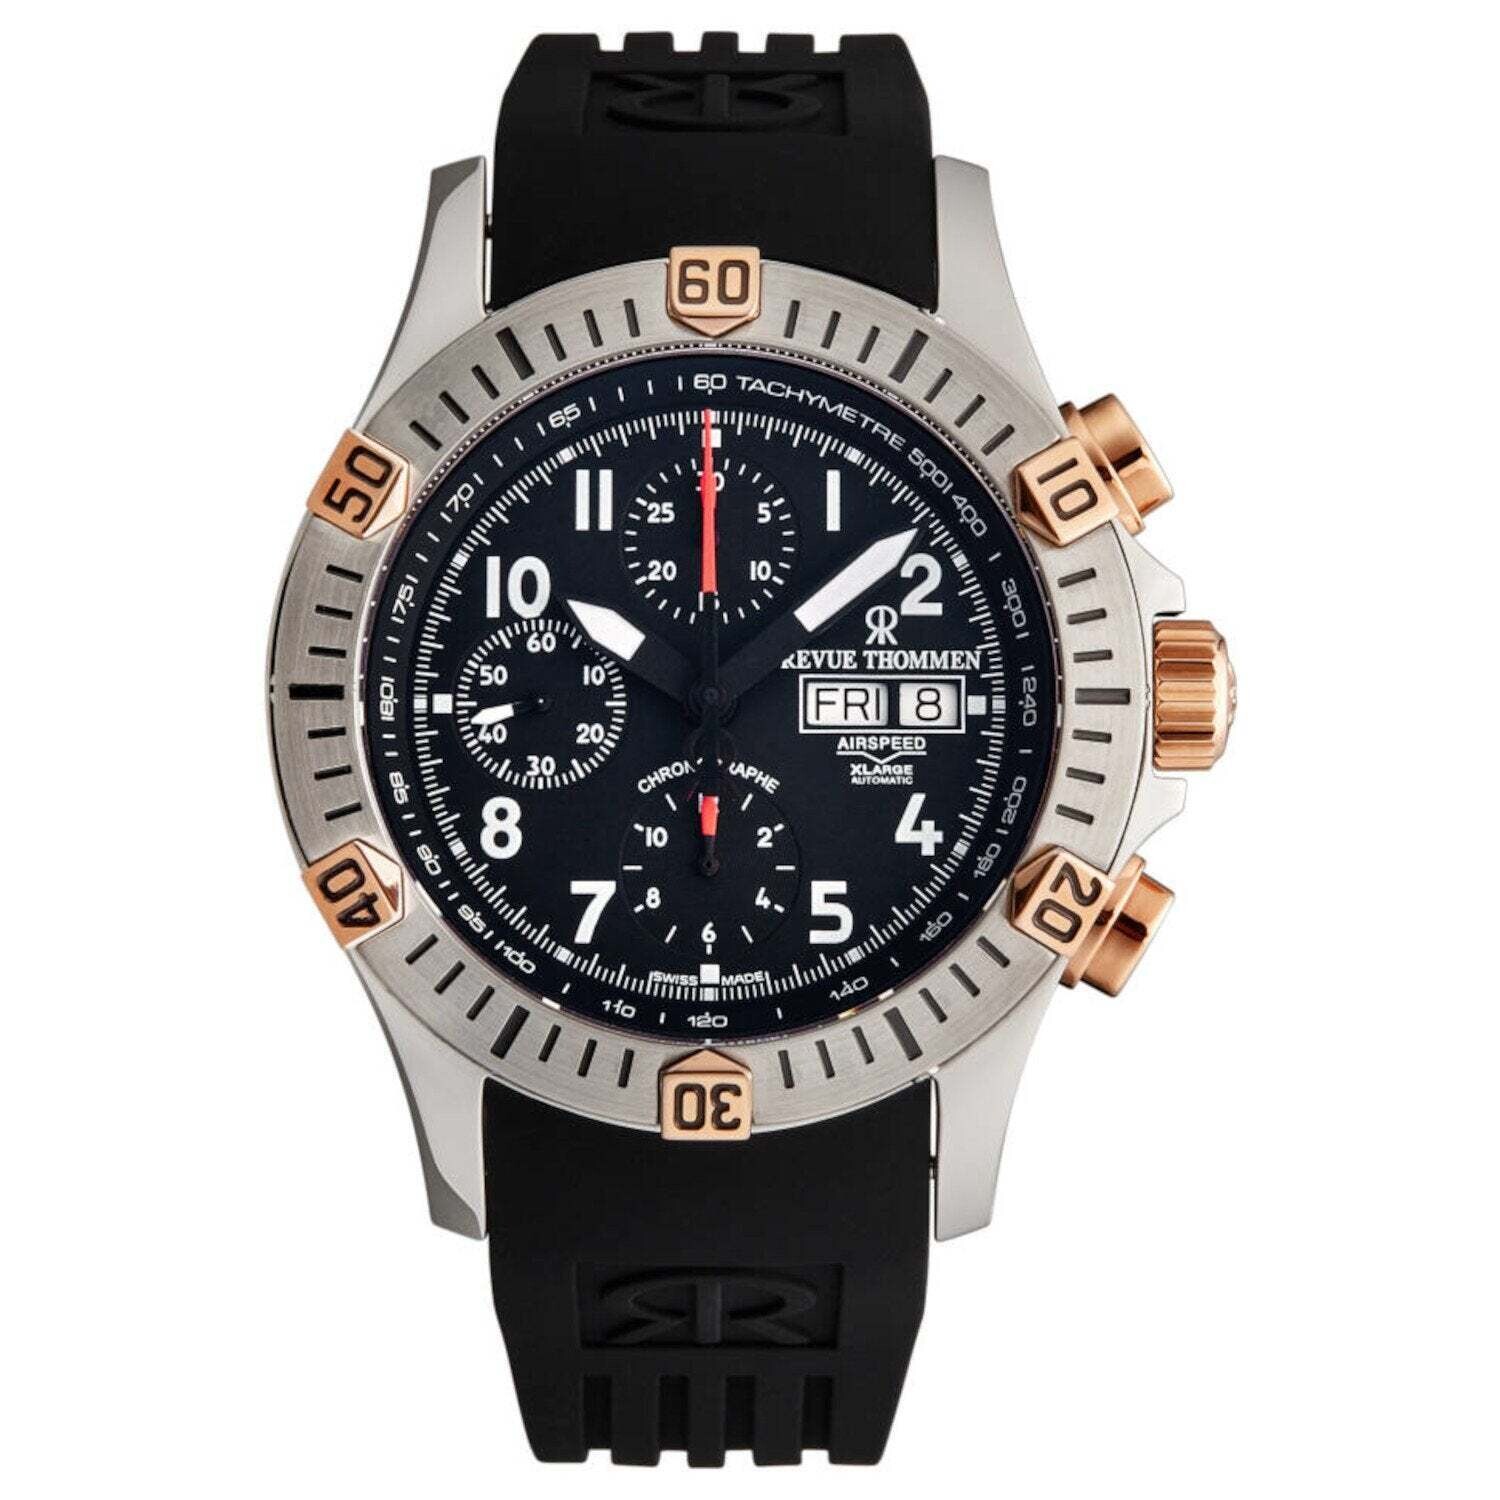 Revue Thommen 16071.6854 Men's 'Airspeed' Black Dial Day-Date Chronograph Automatic Watch